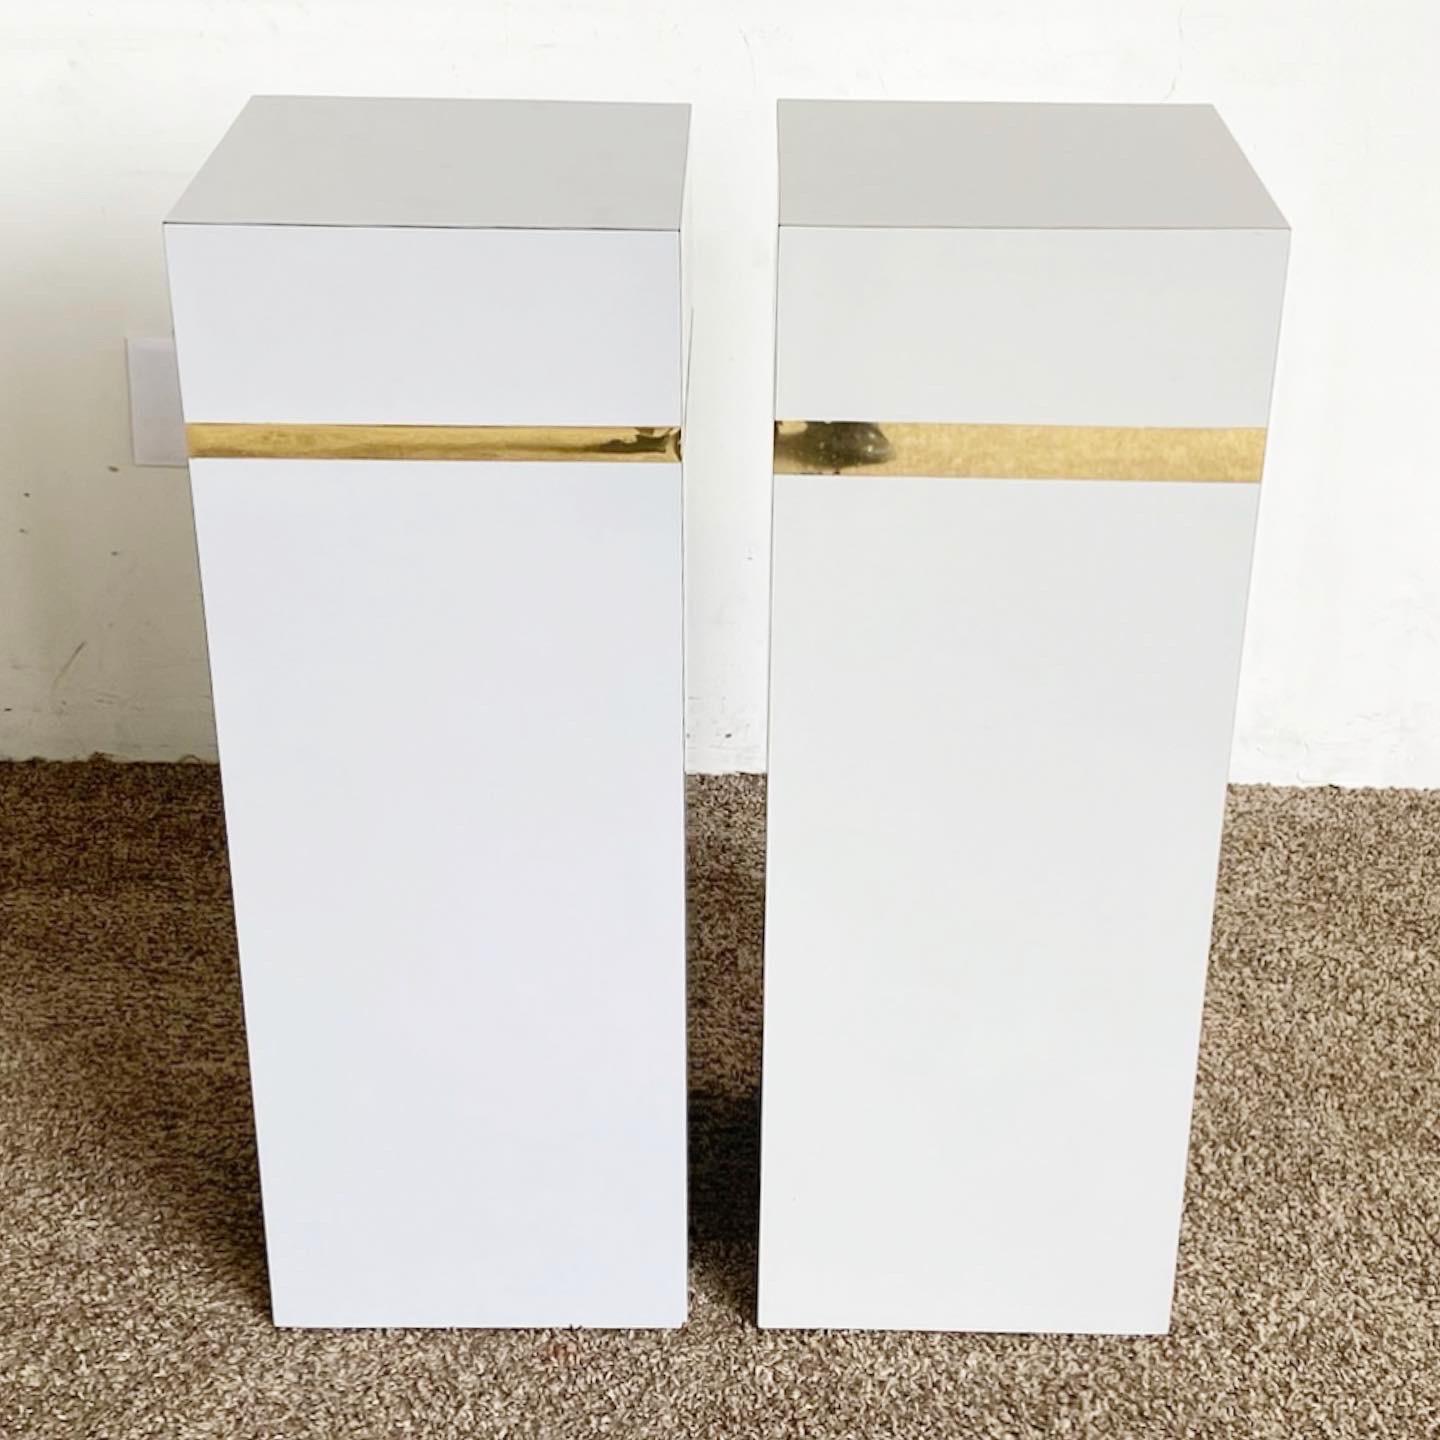 Postmodern Gray Lacquer Laminate and Gold Rectangular Pedestals - a Pair For Sale 2